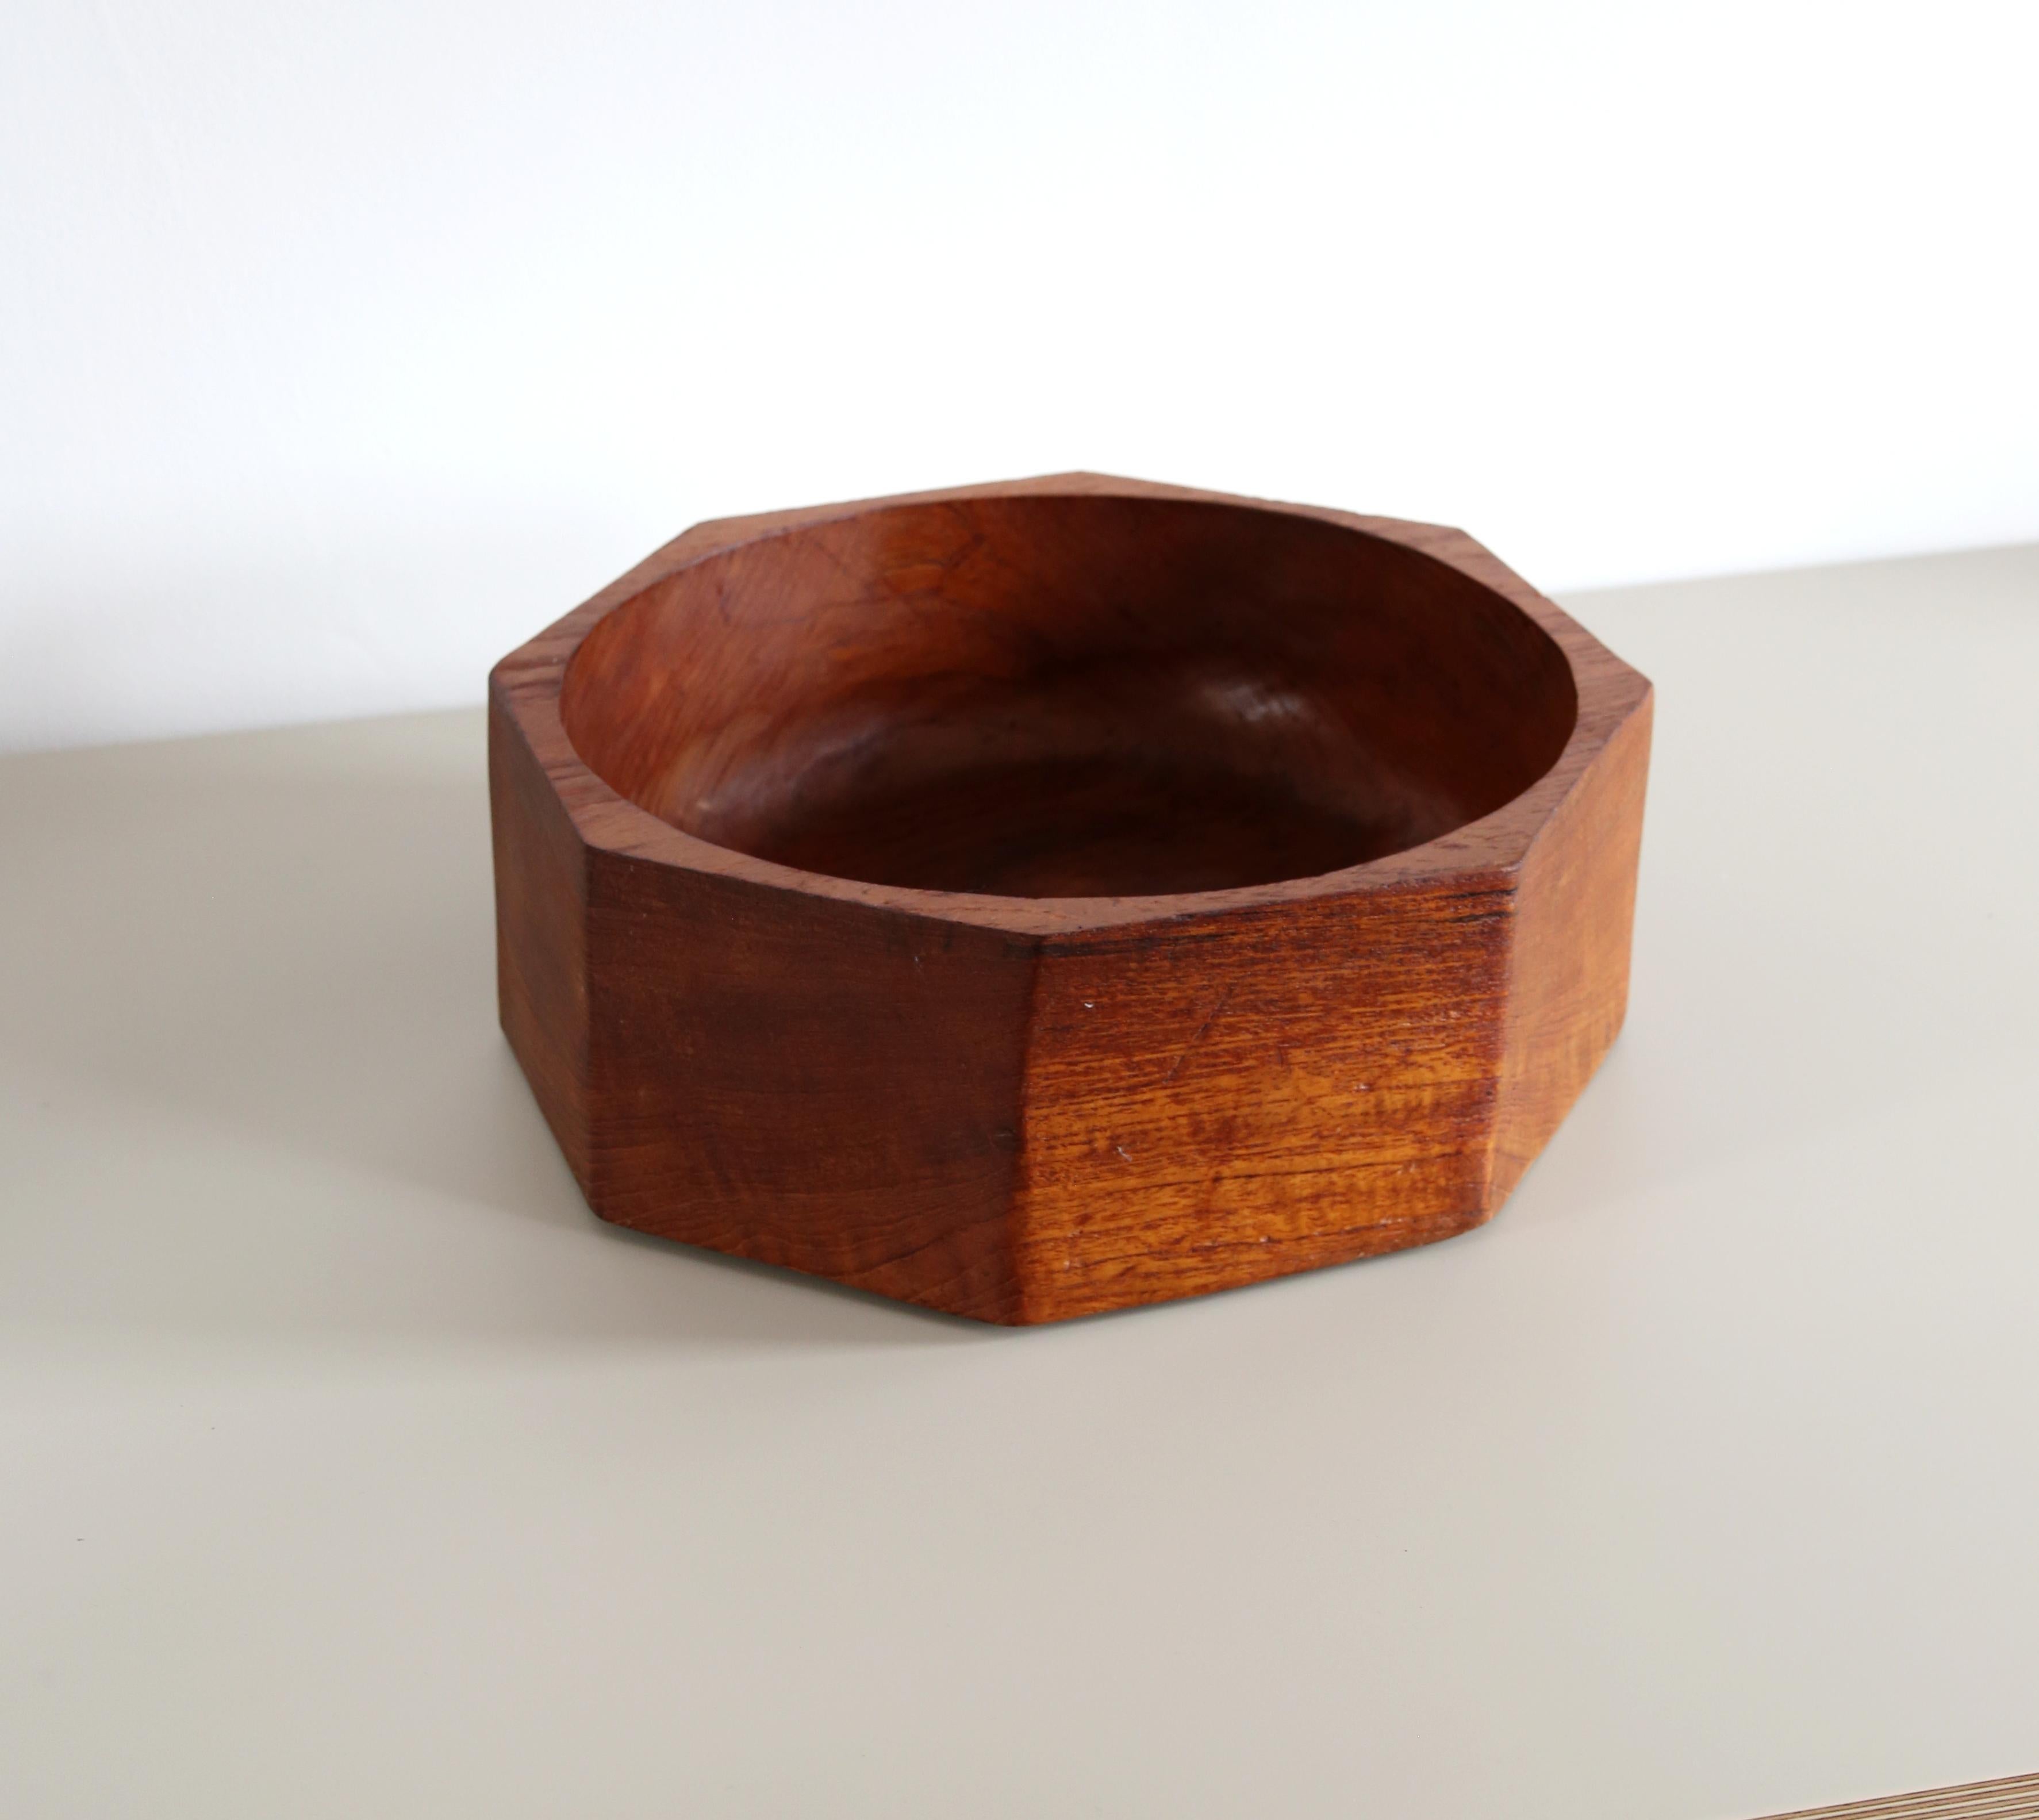 Lovely vintage Mid-Century Danish solid teak wood octagonal bowl
A nice, heavy piece of vintage scandinavian design with a unique octagonal shaped outer with a rounded inside. 
This beautiful Danish modern bowl with vivid wood grain is carved from a